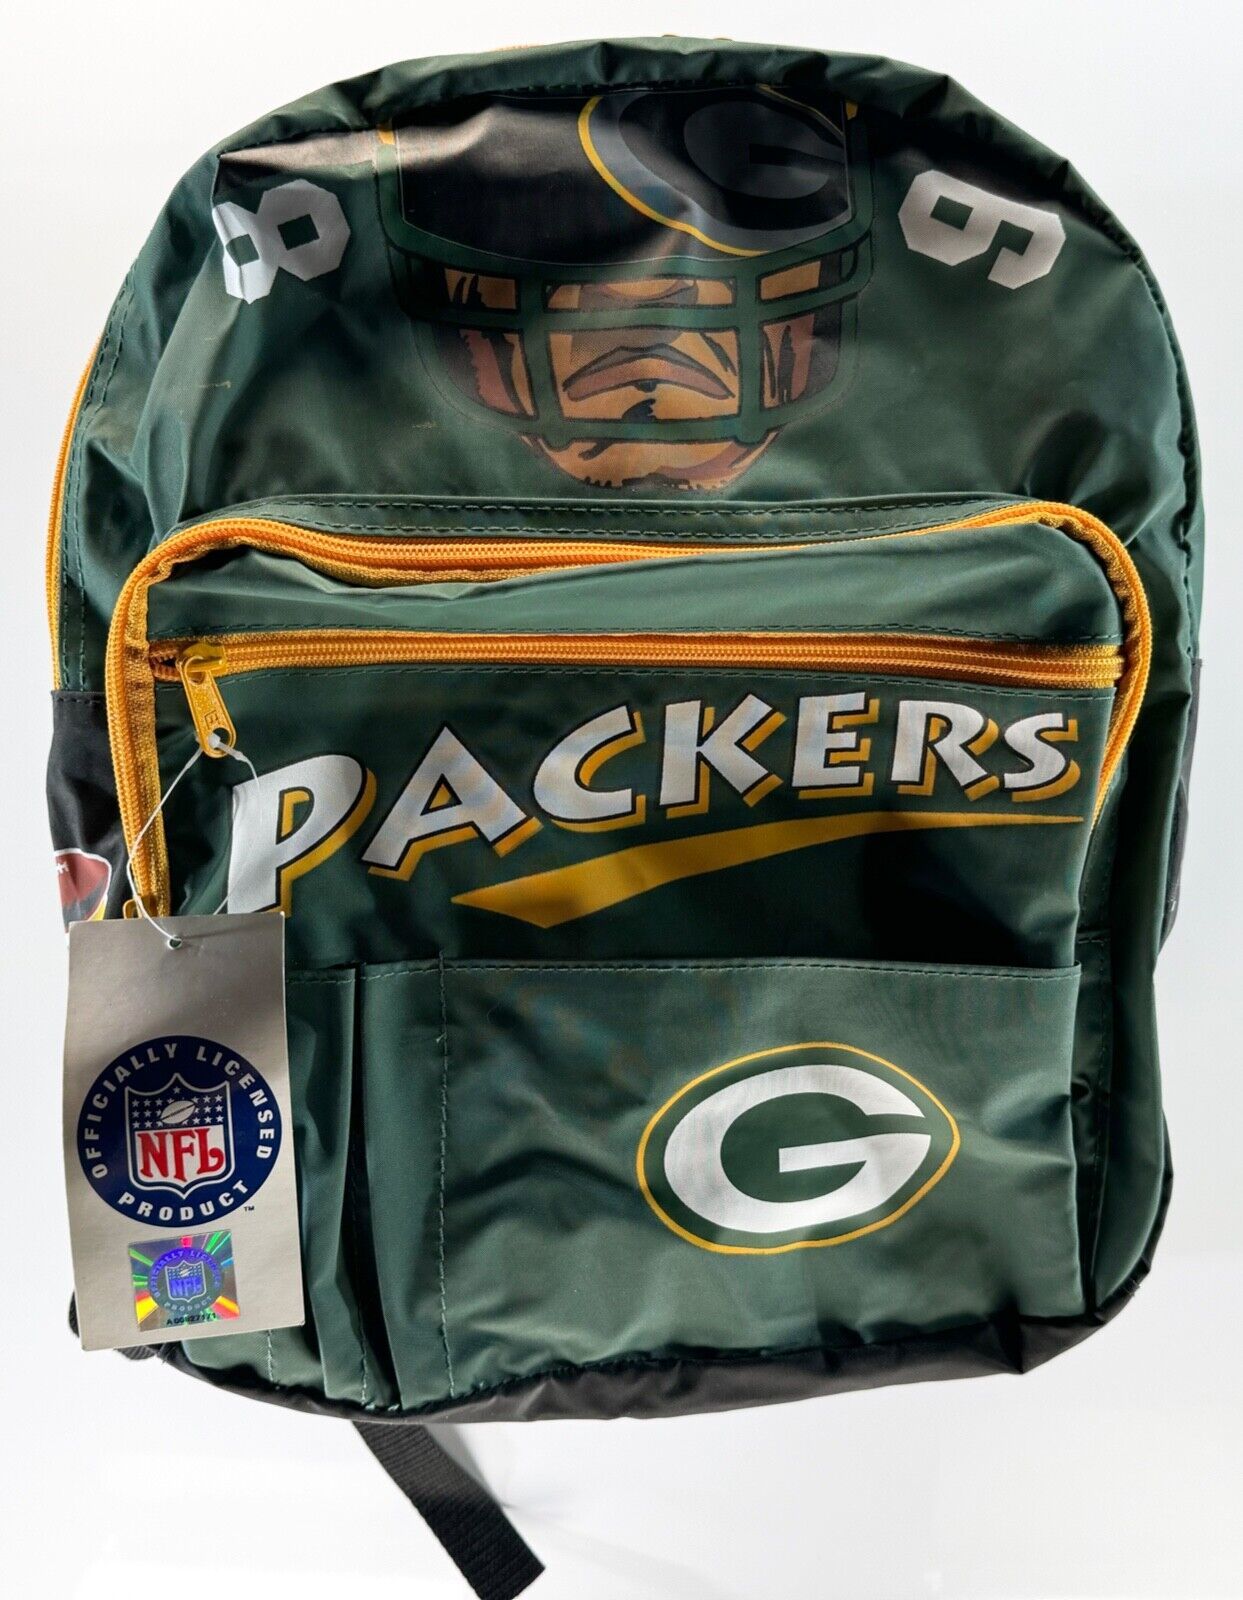 1989 Vintage Green Bay Packers Backpack Bag NEW w/ Tags NFL Licensed Product - $29.68